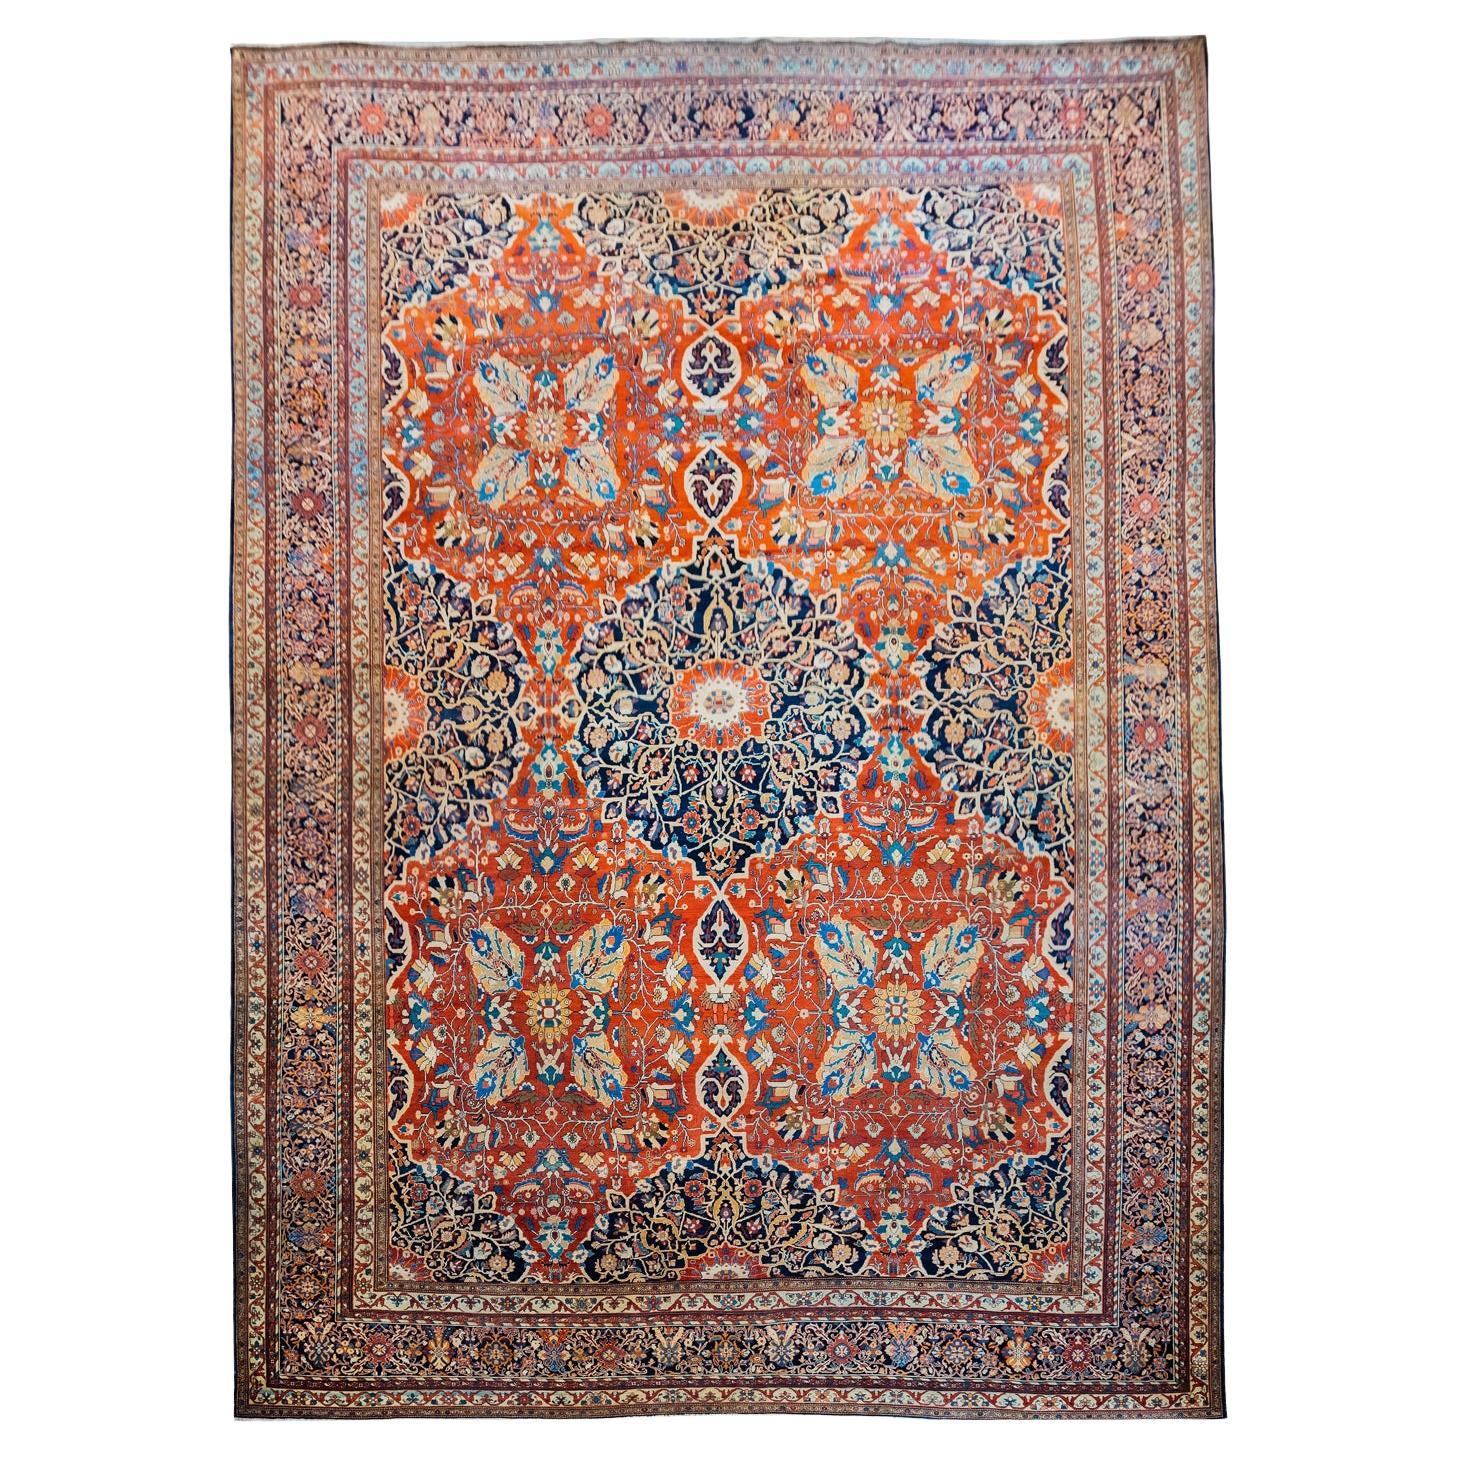 Antique Wool Persian Farahan Carpet, Hand-Knotted, Red, Indigo, Cream, 12’ x 17’ For Sale